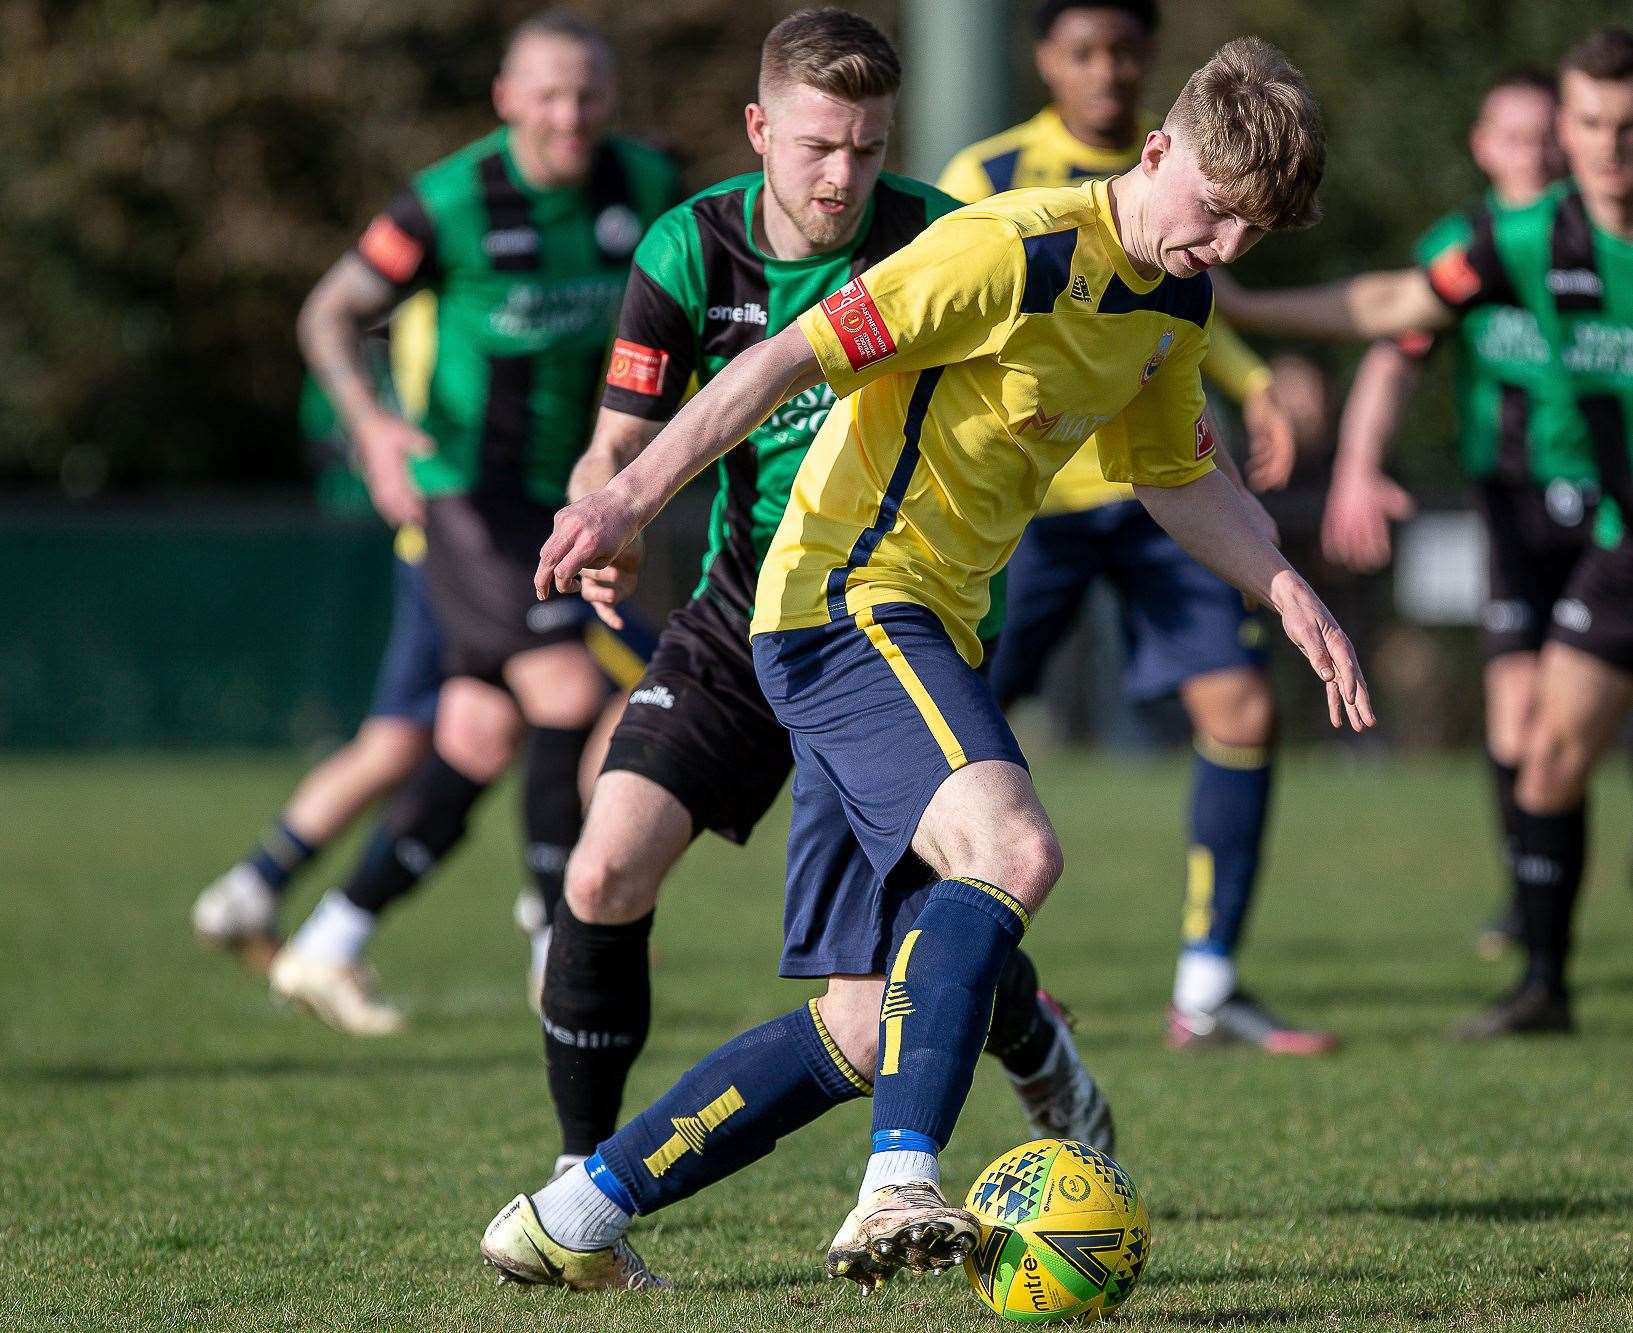 Whitstable's George McIlroy on the ball at Burgess Hill. Picture: Les Biggs